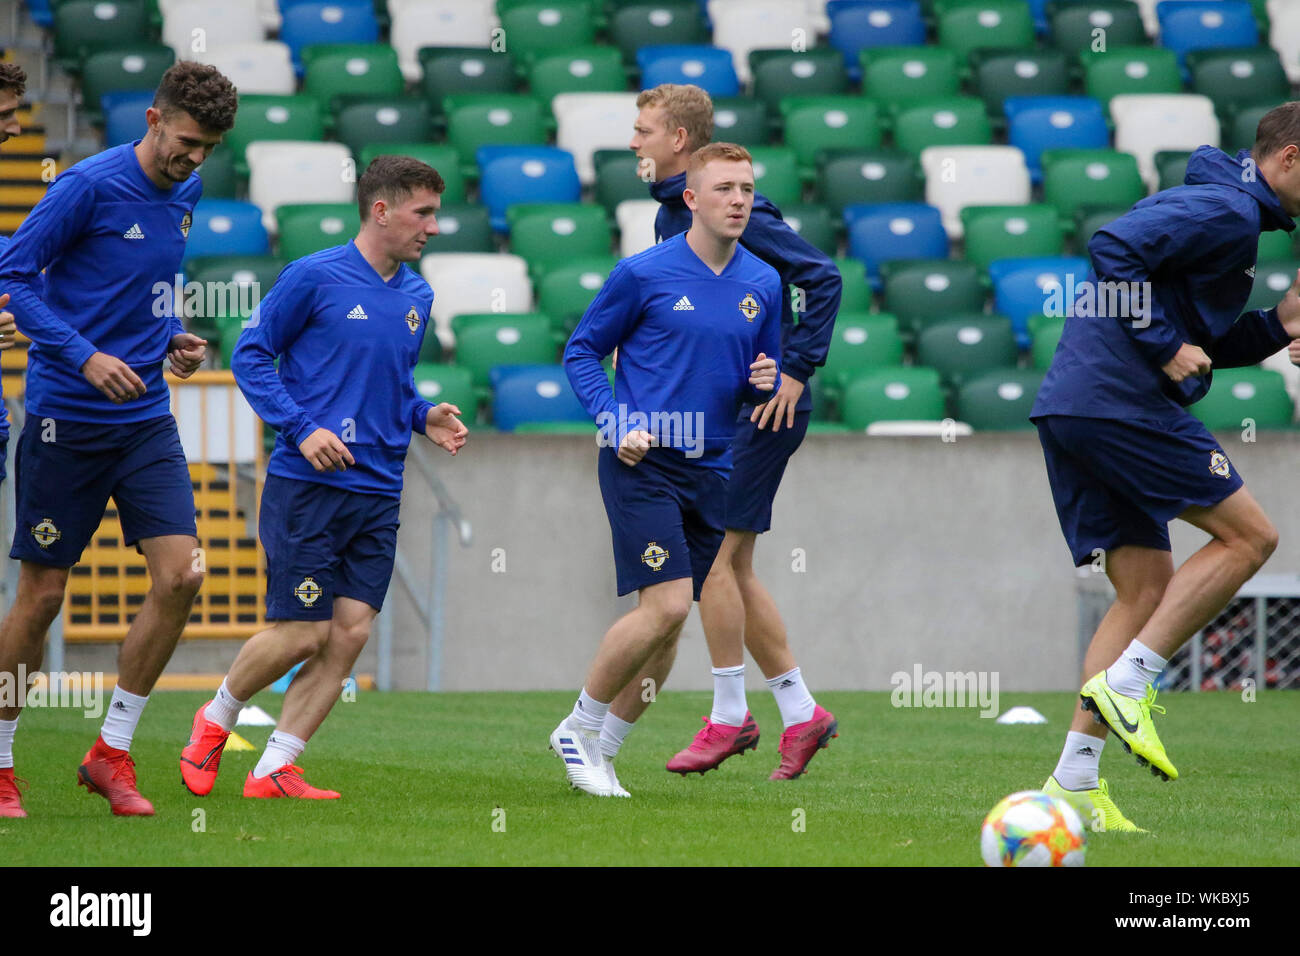 Windsor Park, Belfast, Northern Ireland. 04th Sept 2019. Northern Ireland training in Belfast this morning ahead of their international football friendly against Luxembourg tomorrow night in the stadium. Shayne Lavery at training. Credit: David Hunter/Alamy Live News. Stock Photo